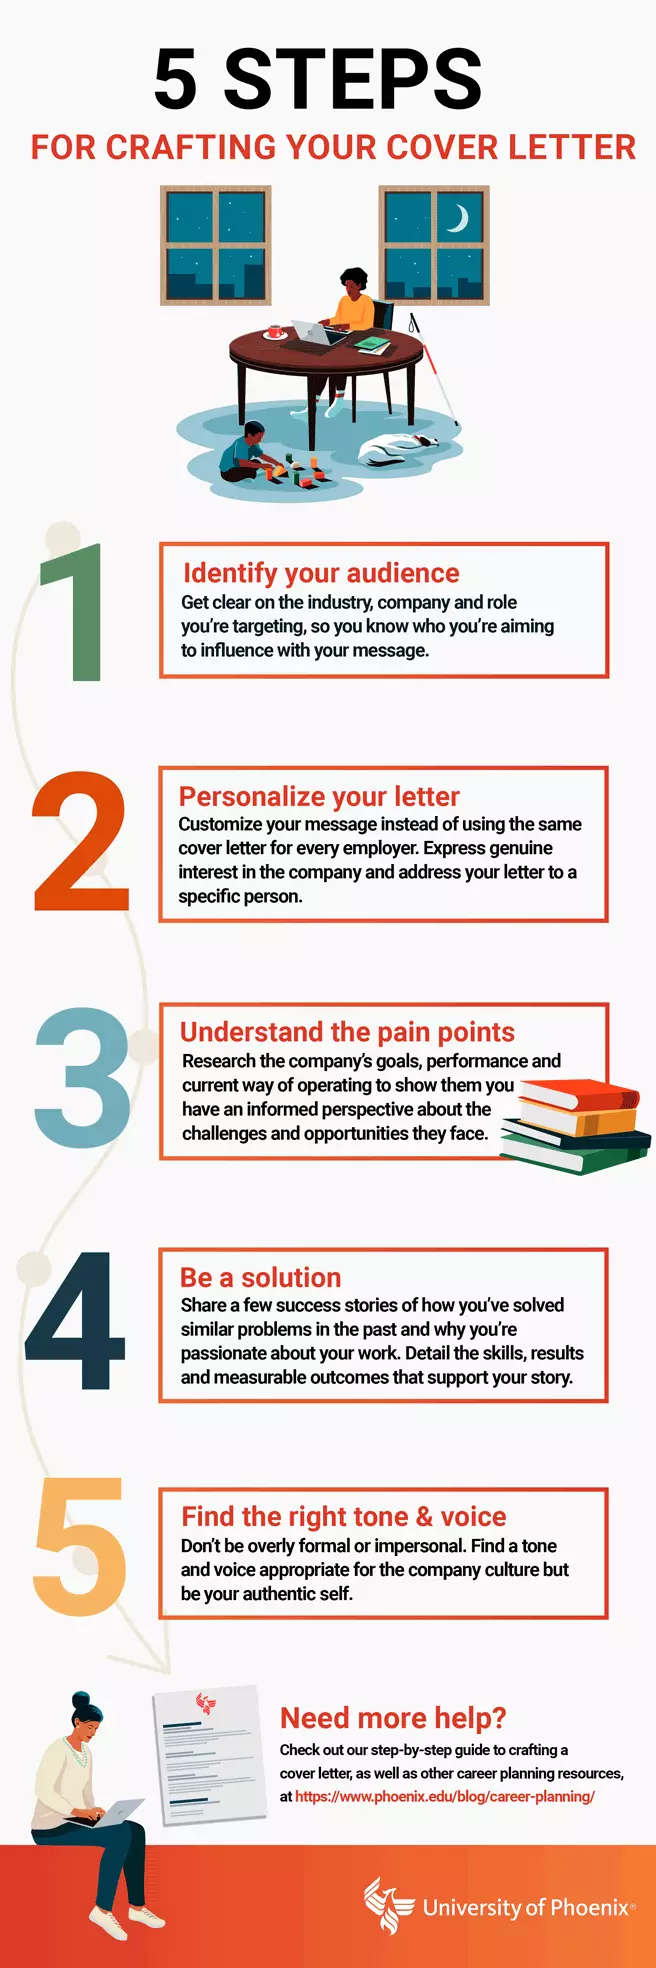 5 steps for crafting your cover letter